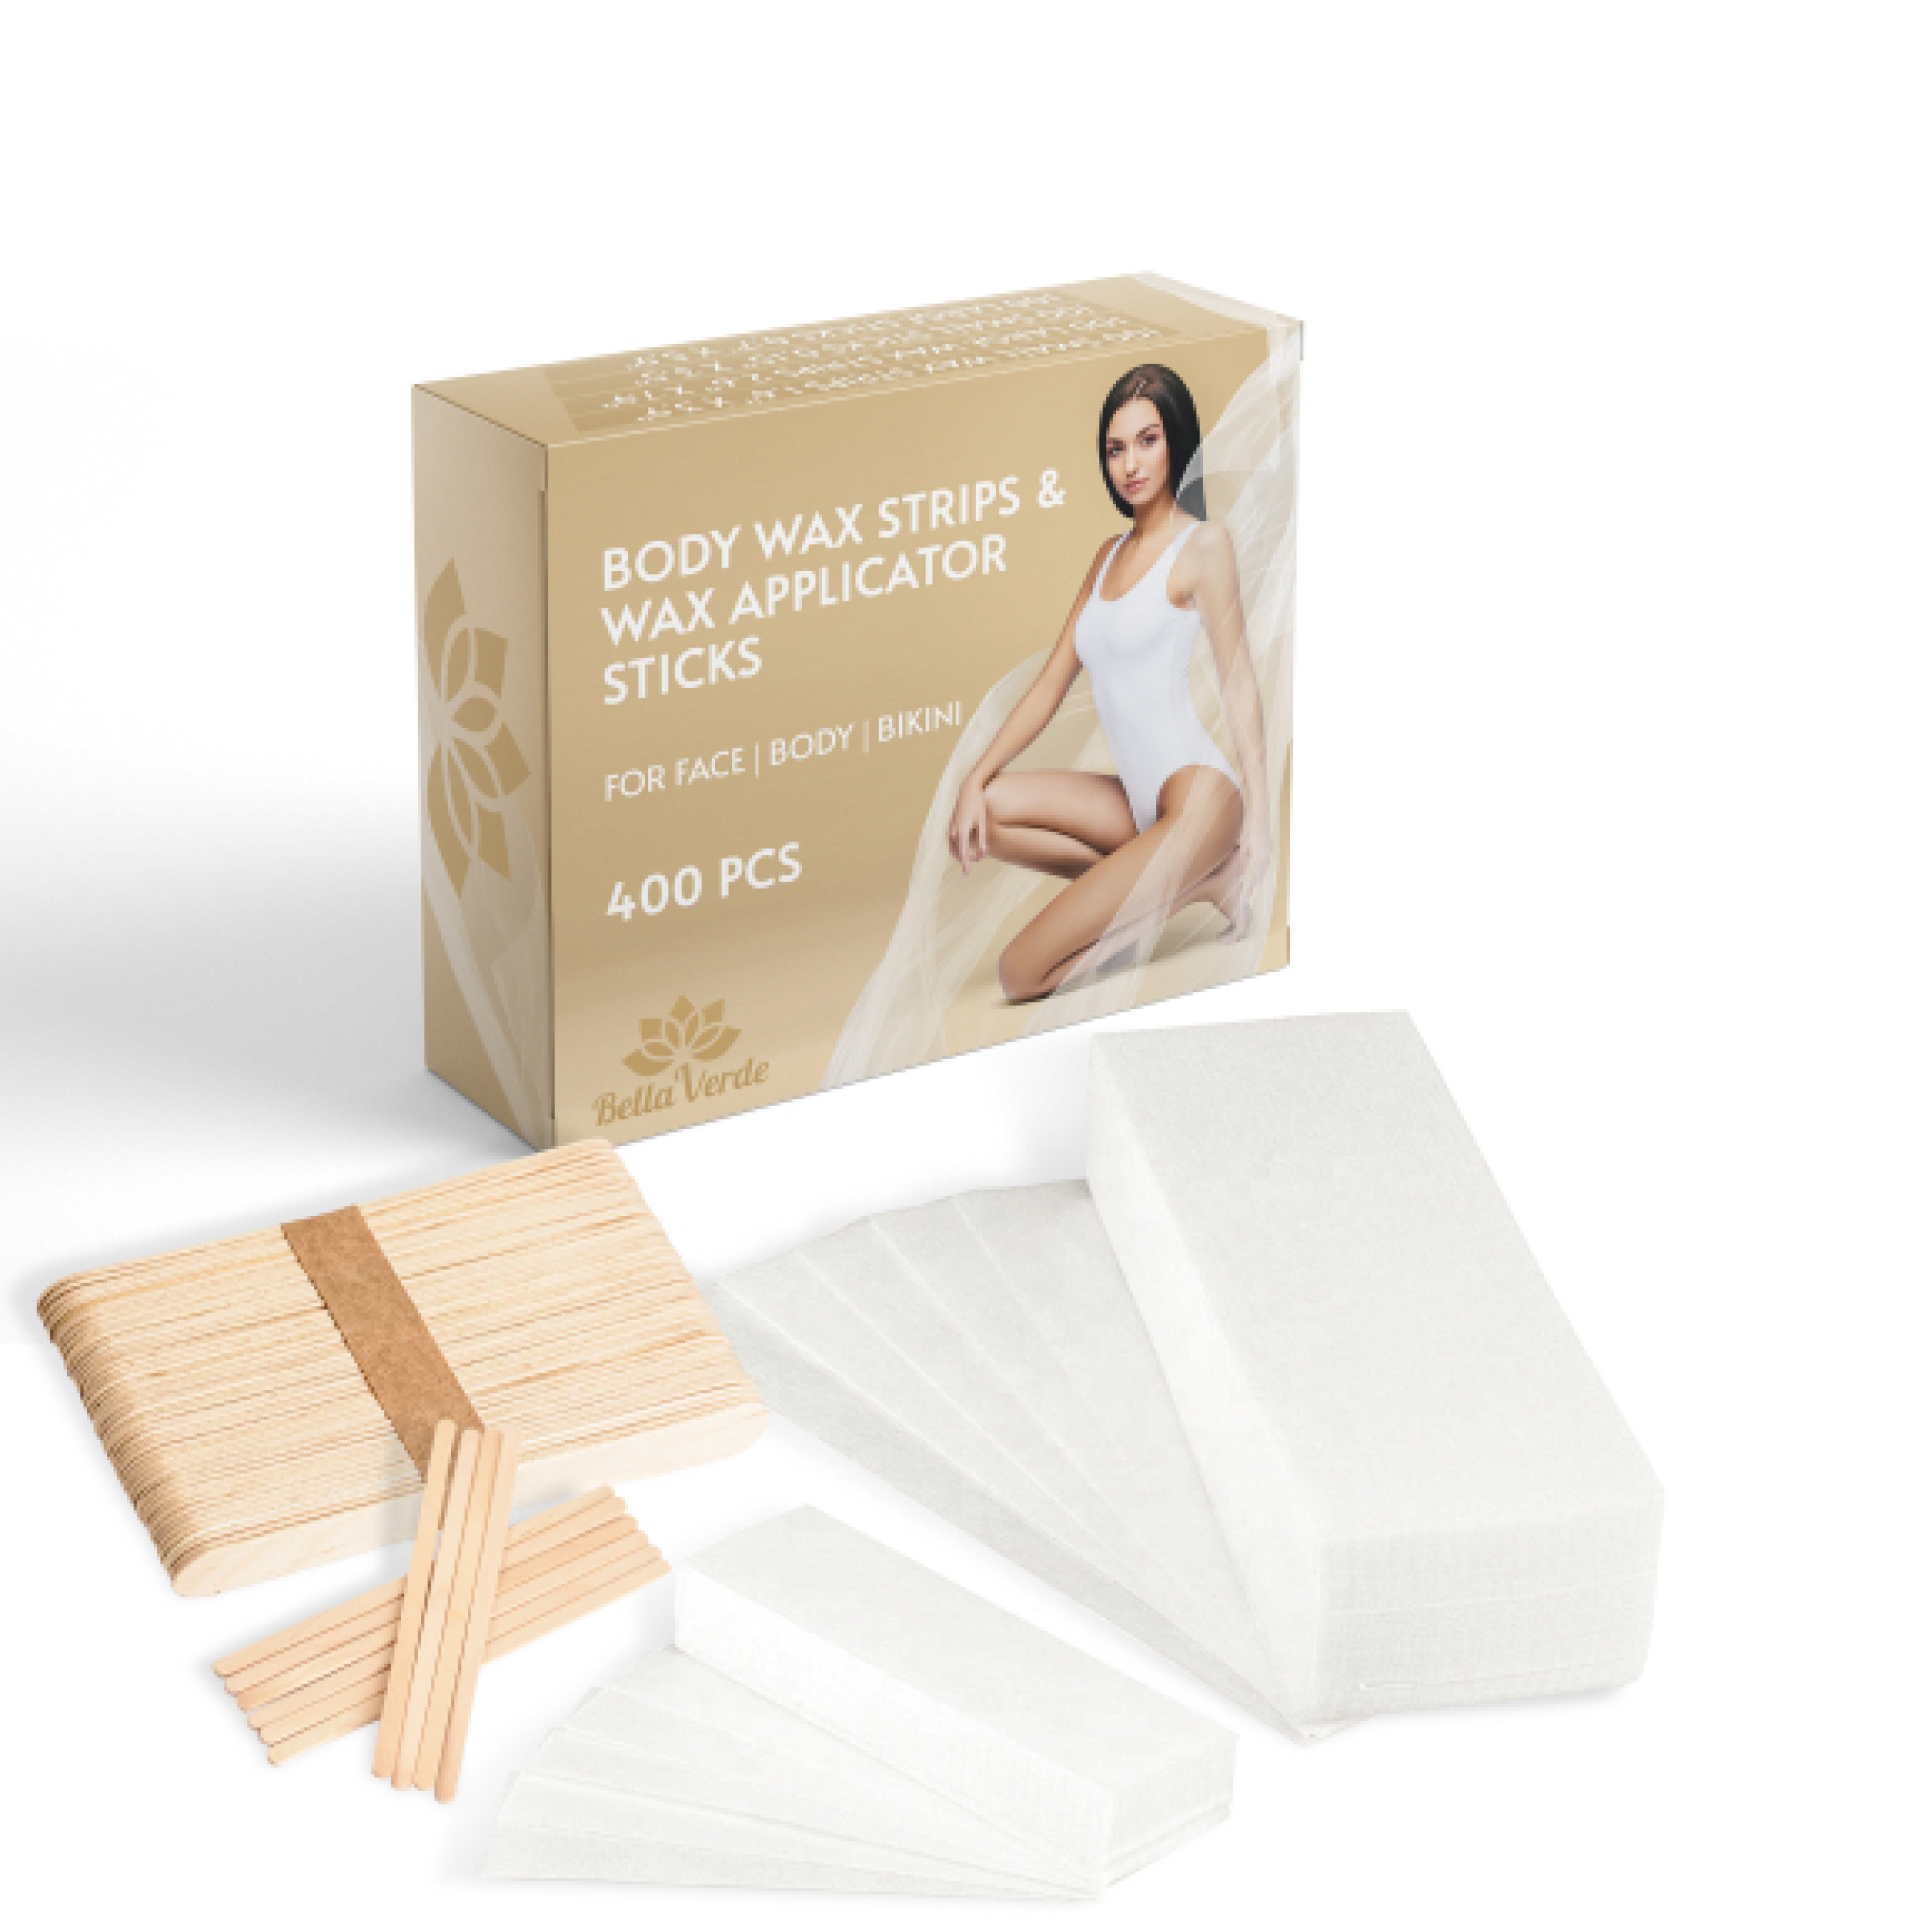 Best body wax strips at home - Make the right choice – BELLA VERDE